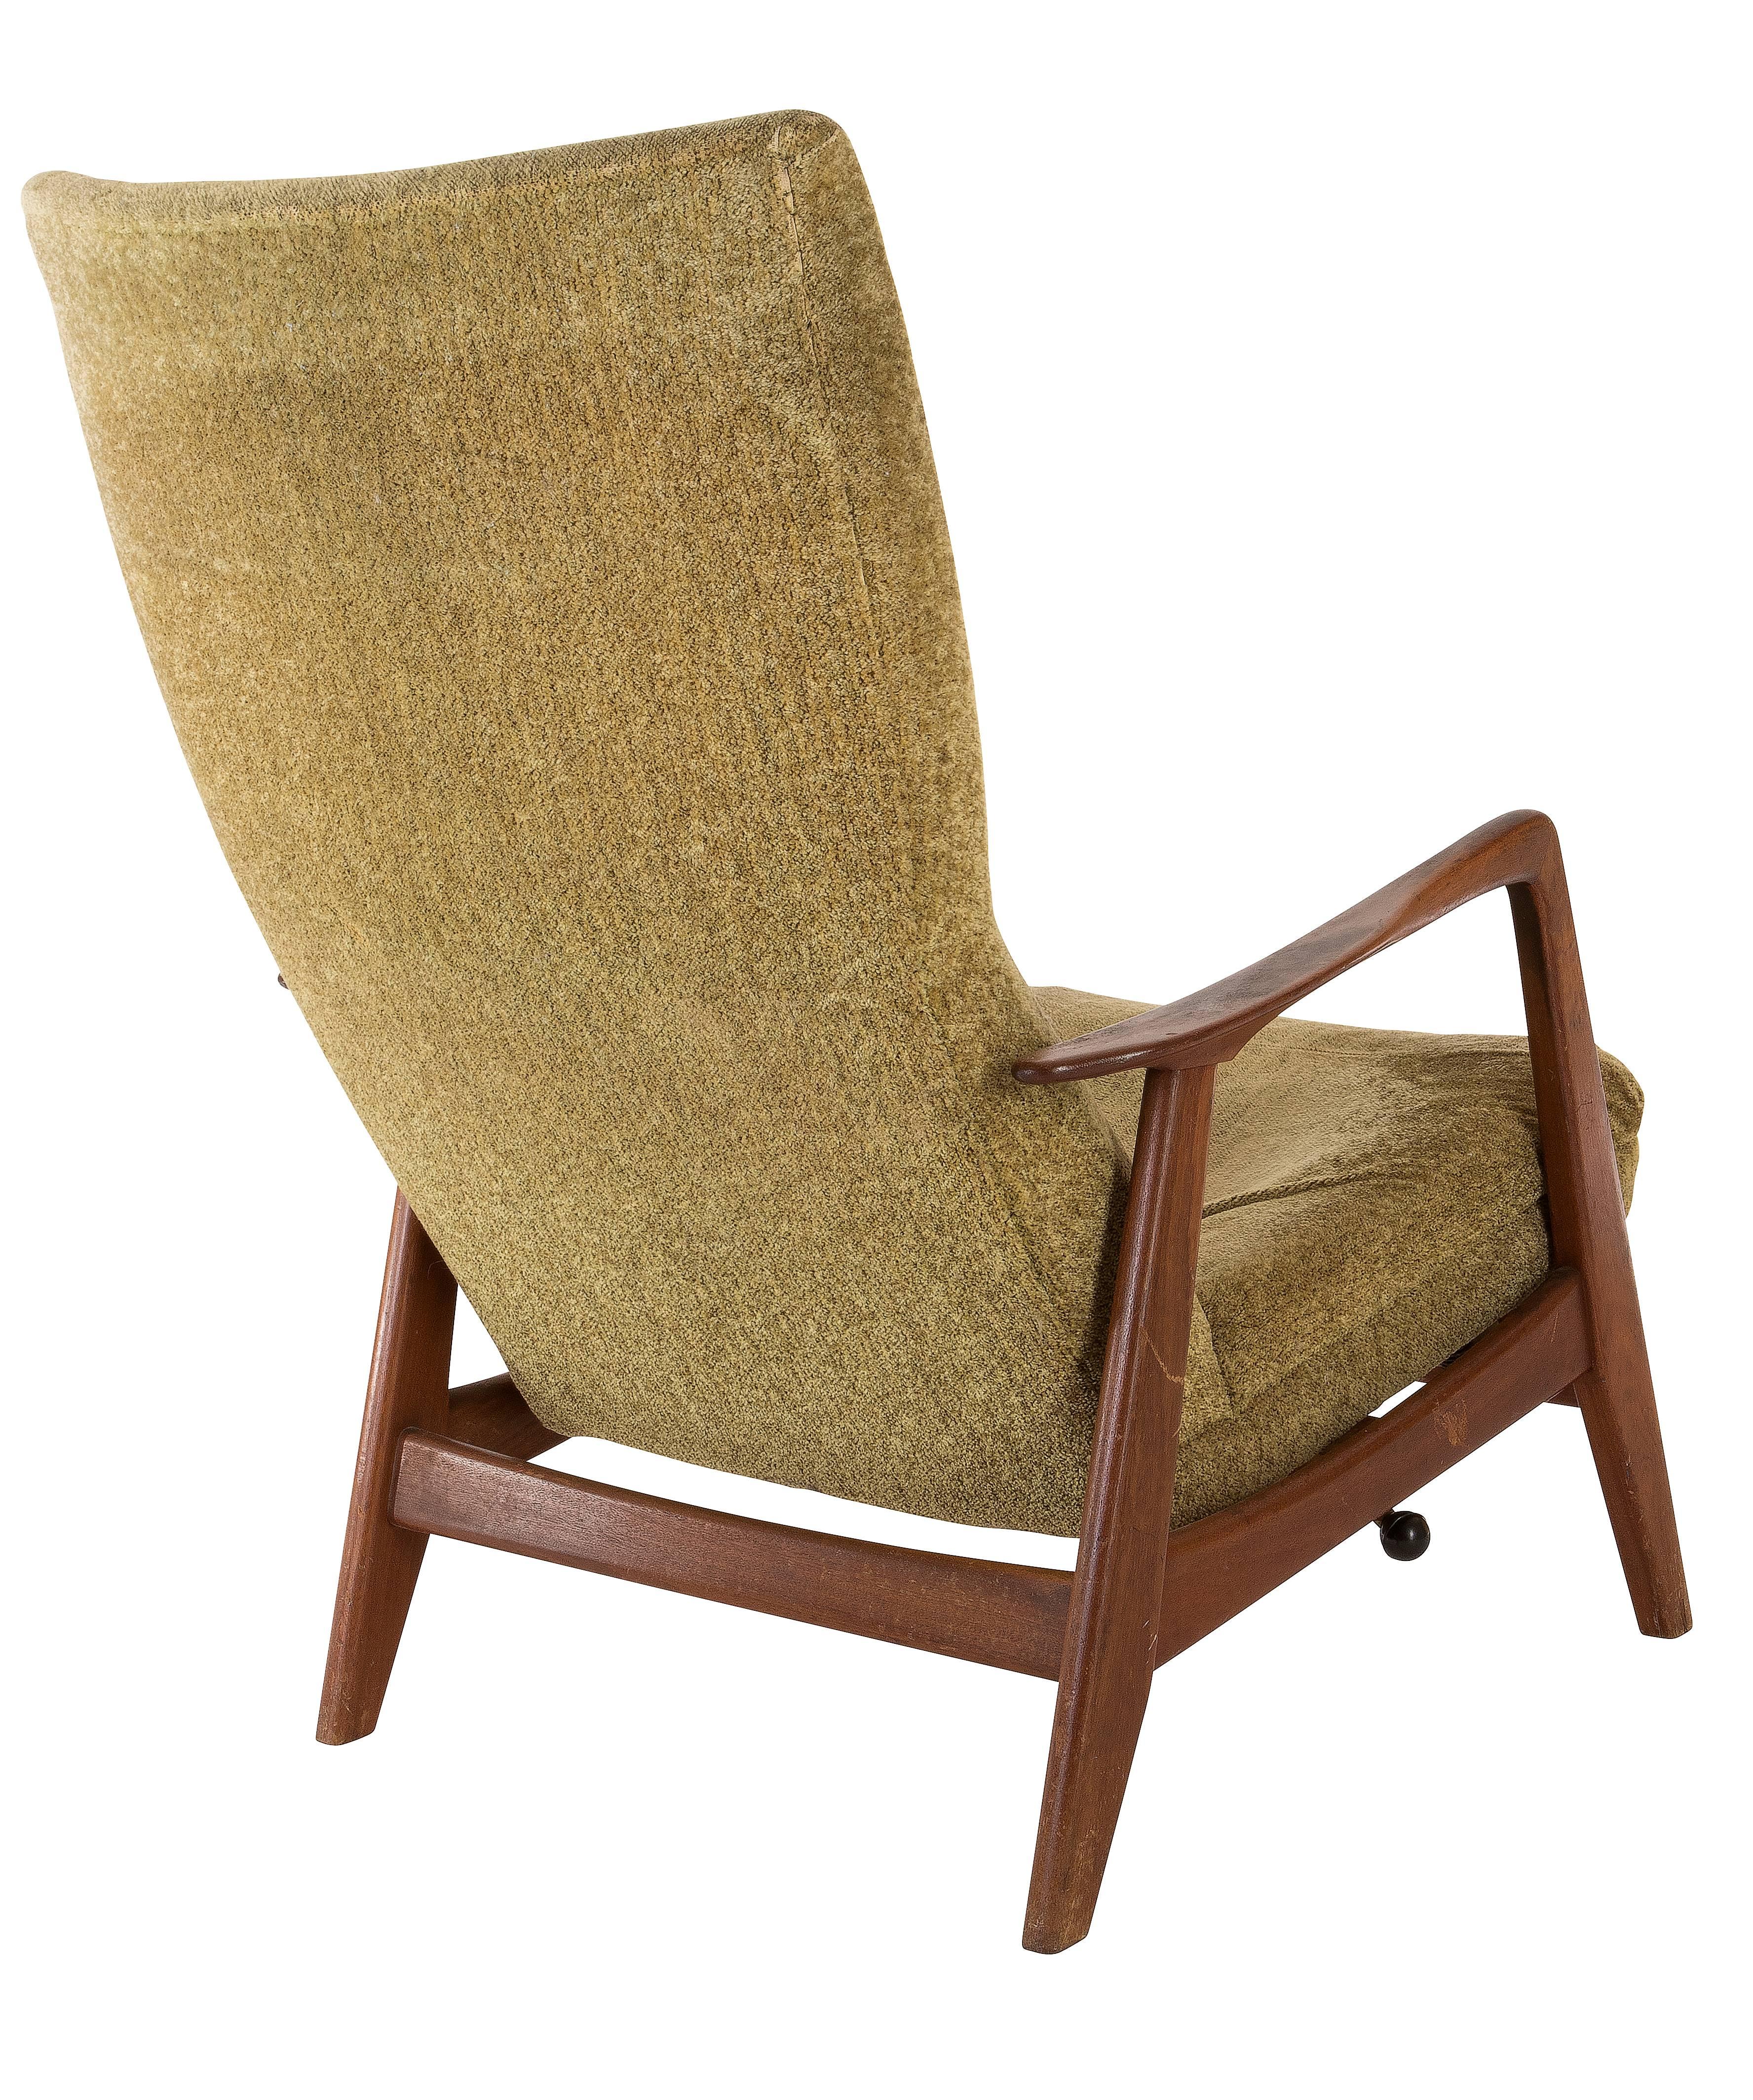 Adjustable high back recliner with original fabric, designed by Folke Ohlsson, manufactured by DUX, Sweden, circa 1960s.

Unrestored item, please note slight tear on the buttoned back area.